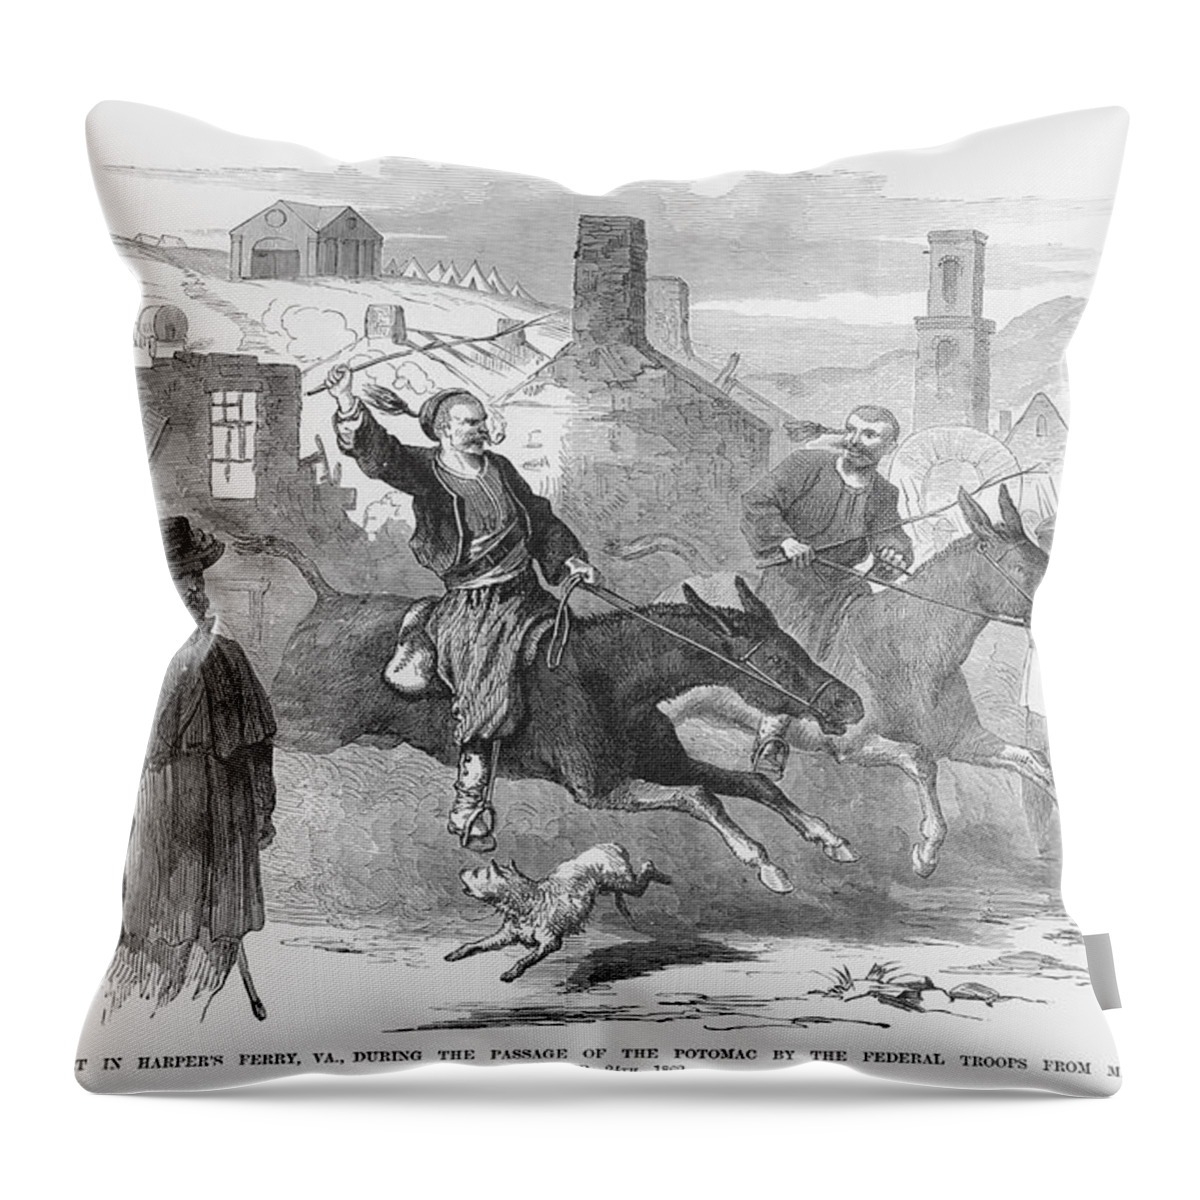 Zouaves Throw Pillow featuring the painting Zouaves Ride their horses thru Harper's Ferry by Frank Leslie